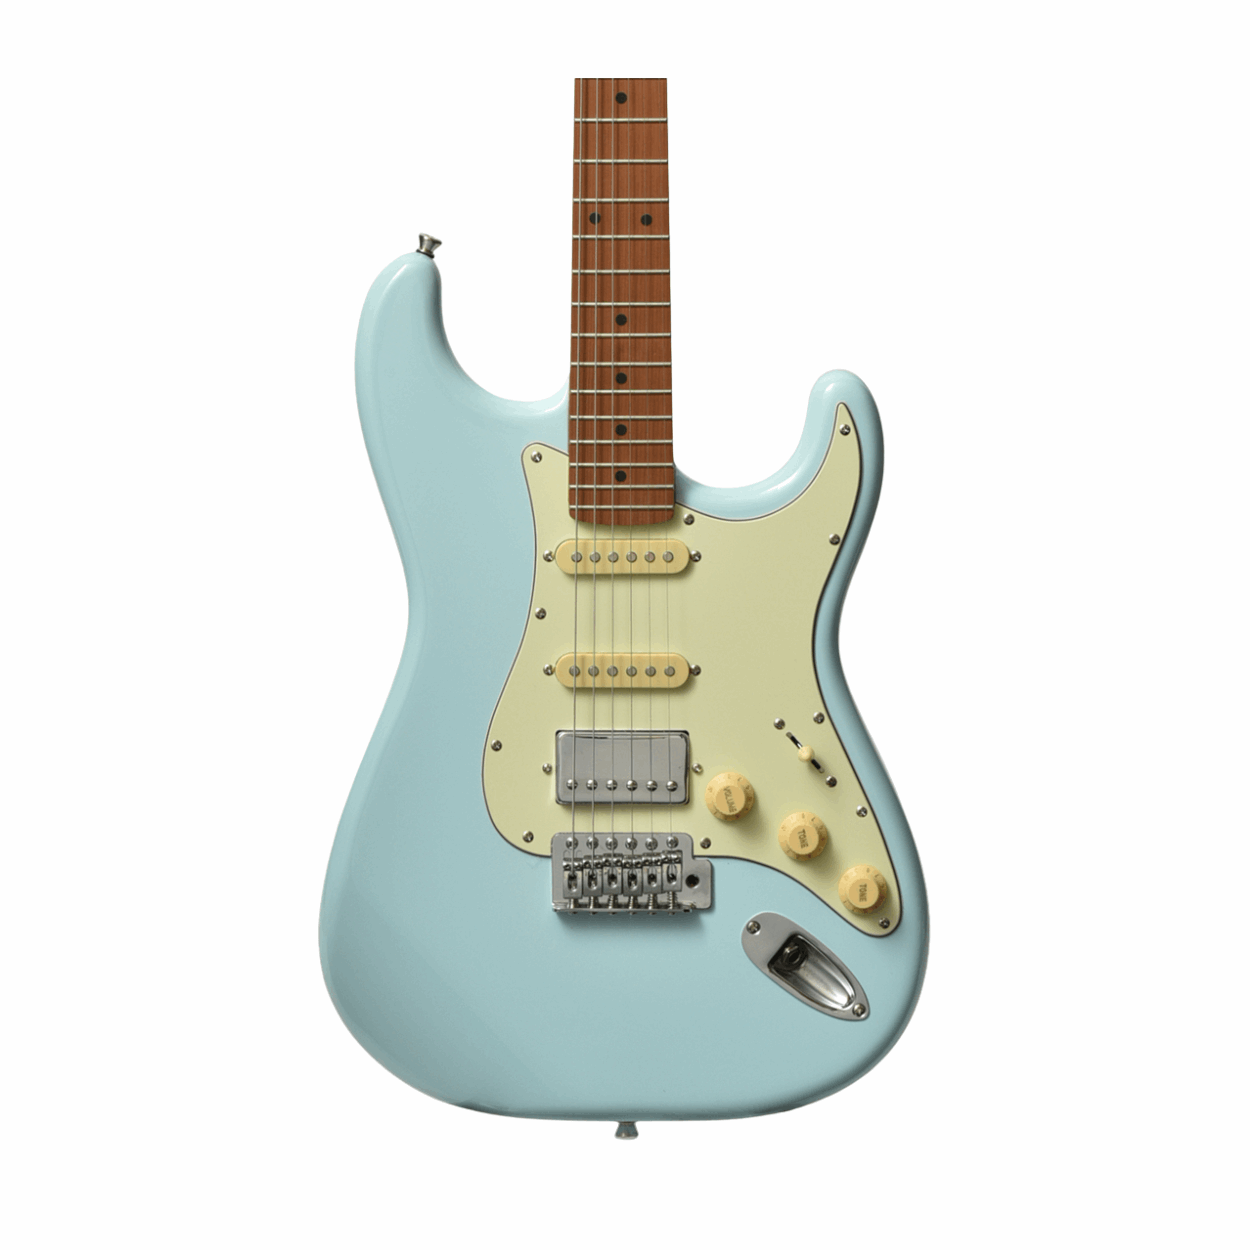 Bacchus Bst-2-rsm/m-ptlsob Universe Series Roasted Maple Electric Guitar, Pastel Sonic Blue With Bag